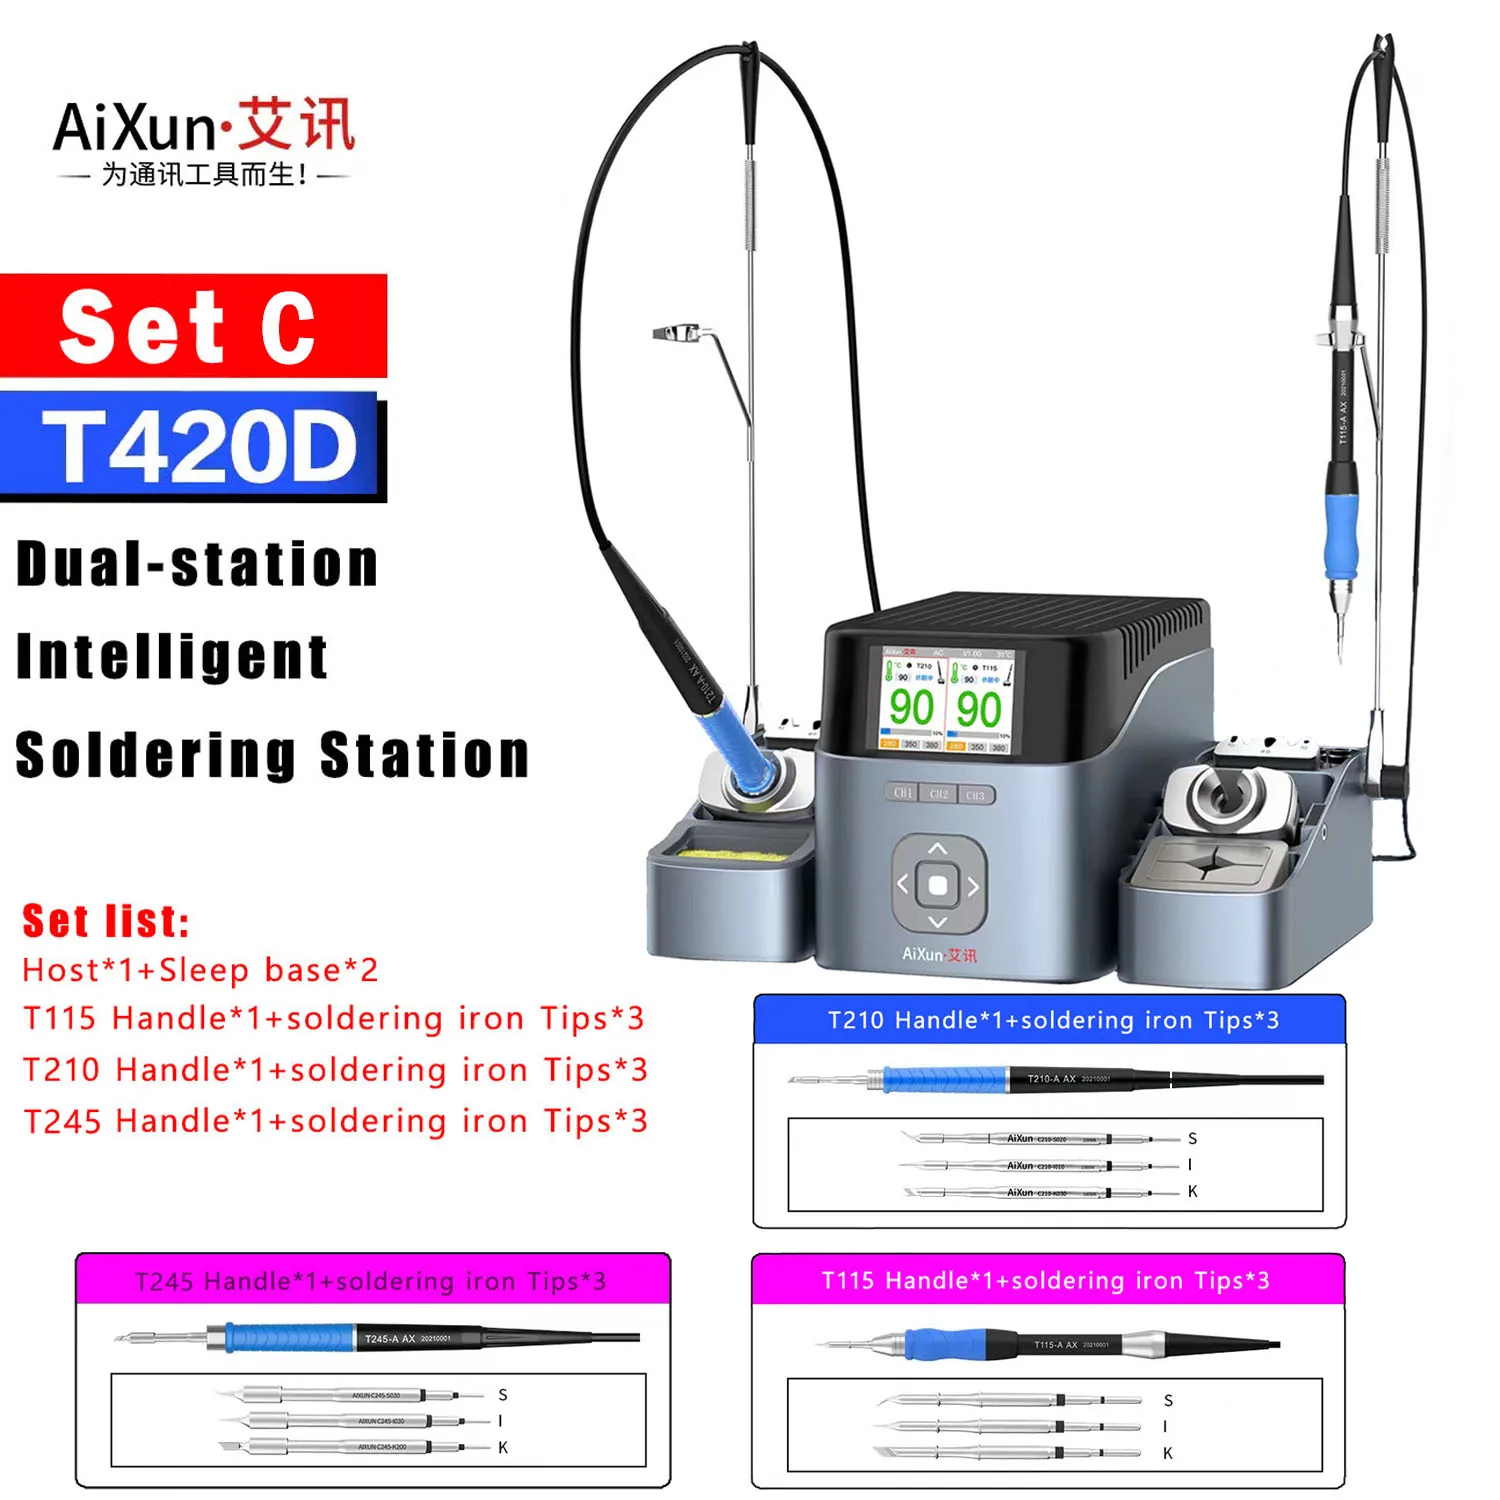 

JCID AIXUN T420D Intelligent Double Soldering Station for PCB SMD Repair With Electric Iron T245/T210/T115 Handle Welding Tips